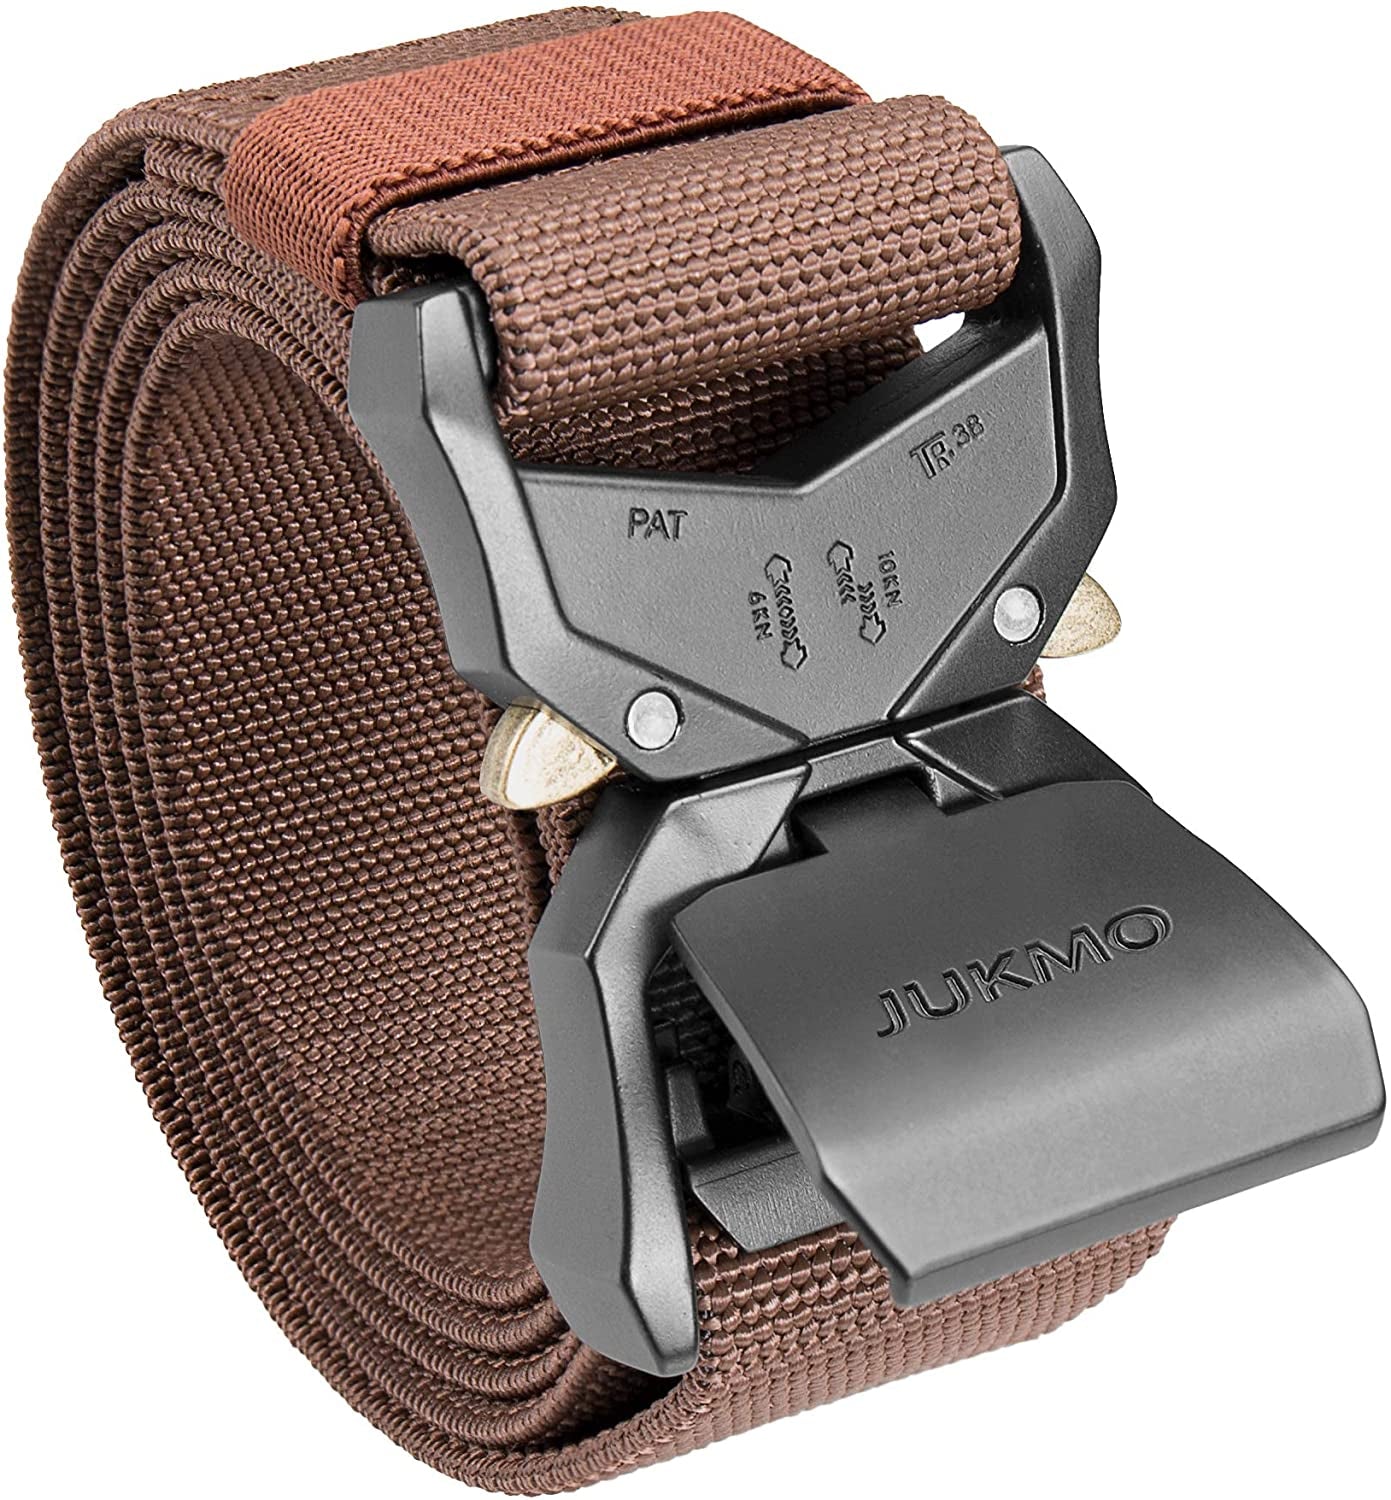 JUKMO Tactical Belt, Military Hiking Rigger 1.5" Nylon Web Work Belt with Heavy Duty Quick Release Buckle Animals & Pet Supplies > Pet Supplies > Dog Supplies > Dog Apparel JUKMO Coffee Small-for Waist 30"-36" (Length 45") 